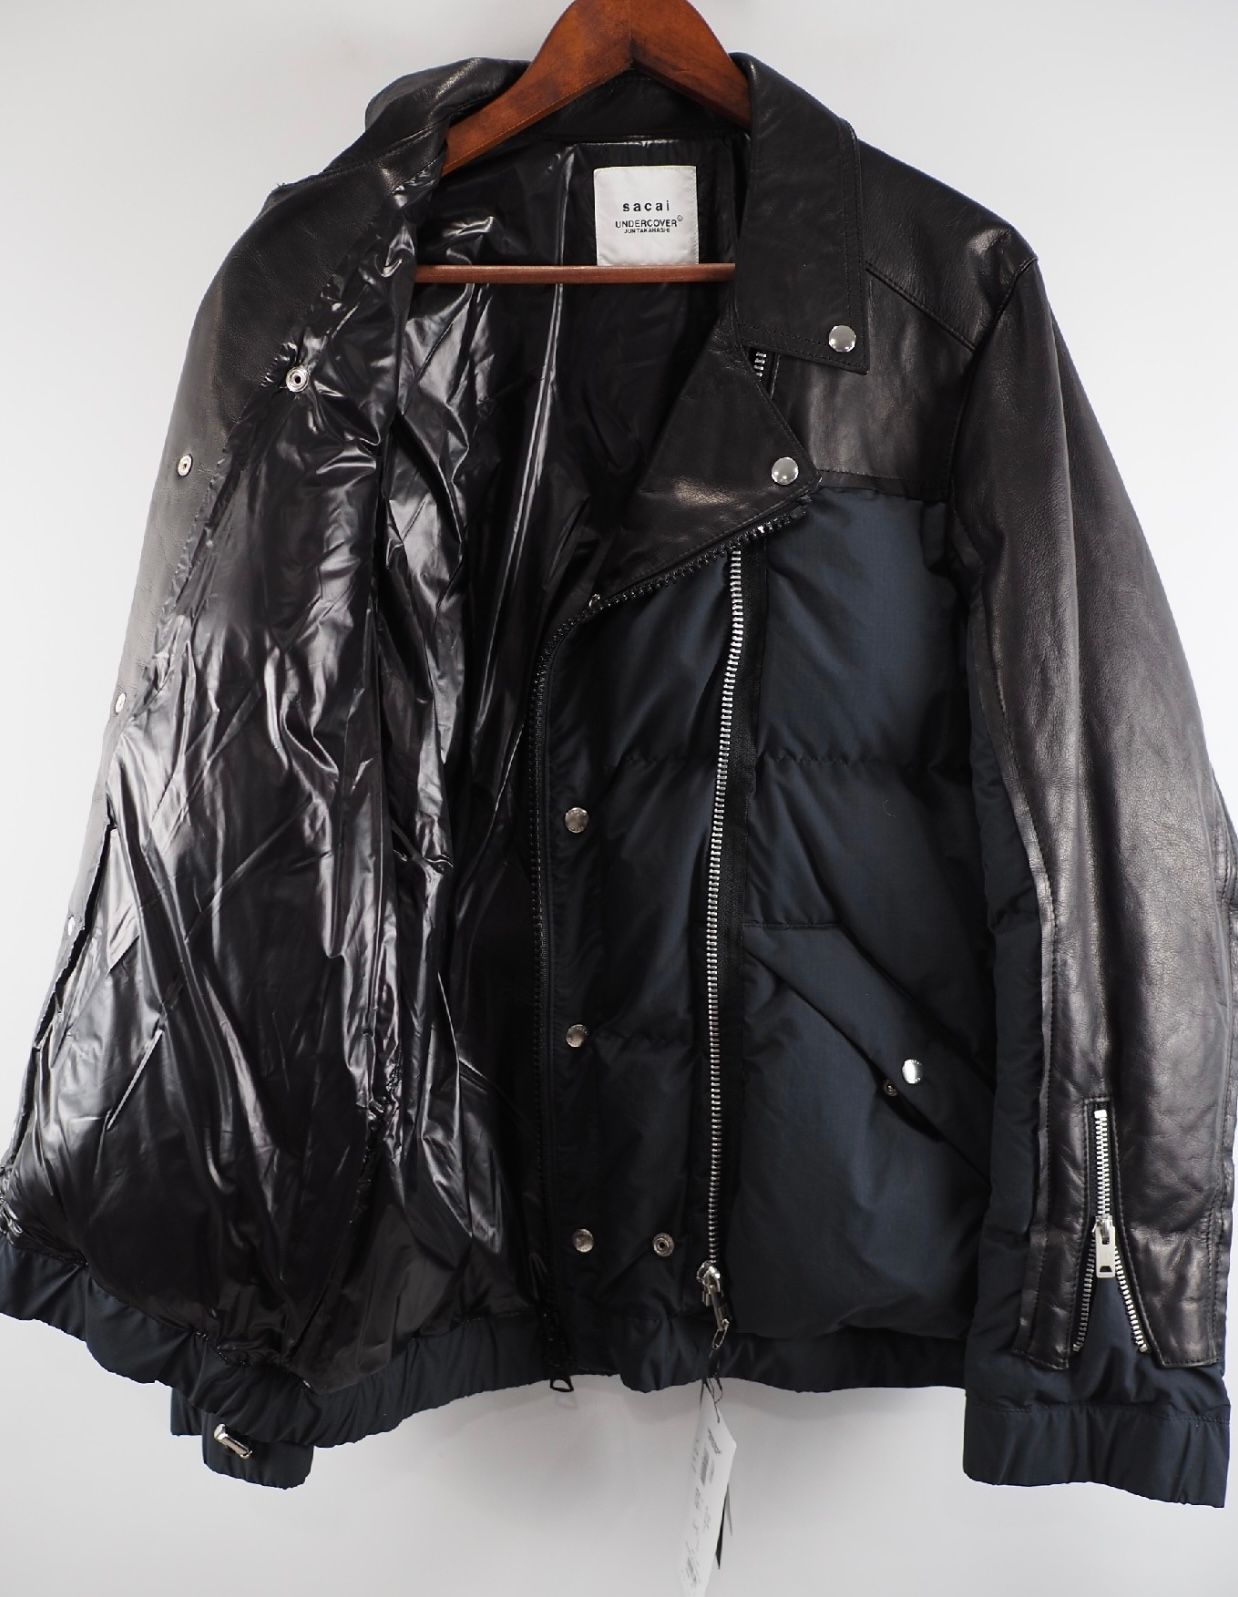 Sacai x Undercover Edition Leather Double Rider's Jacket - 3